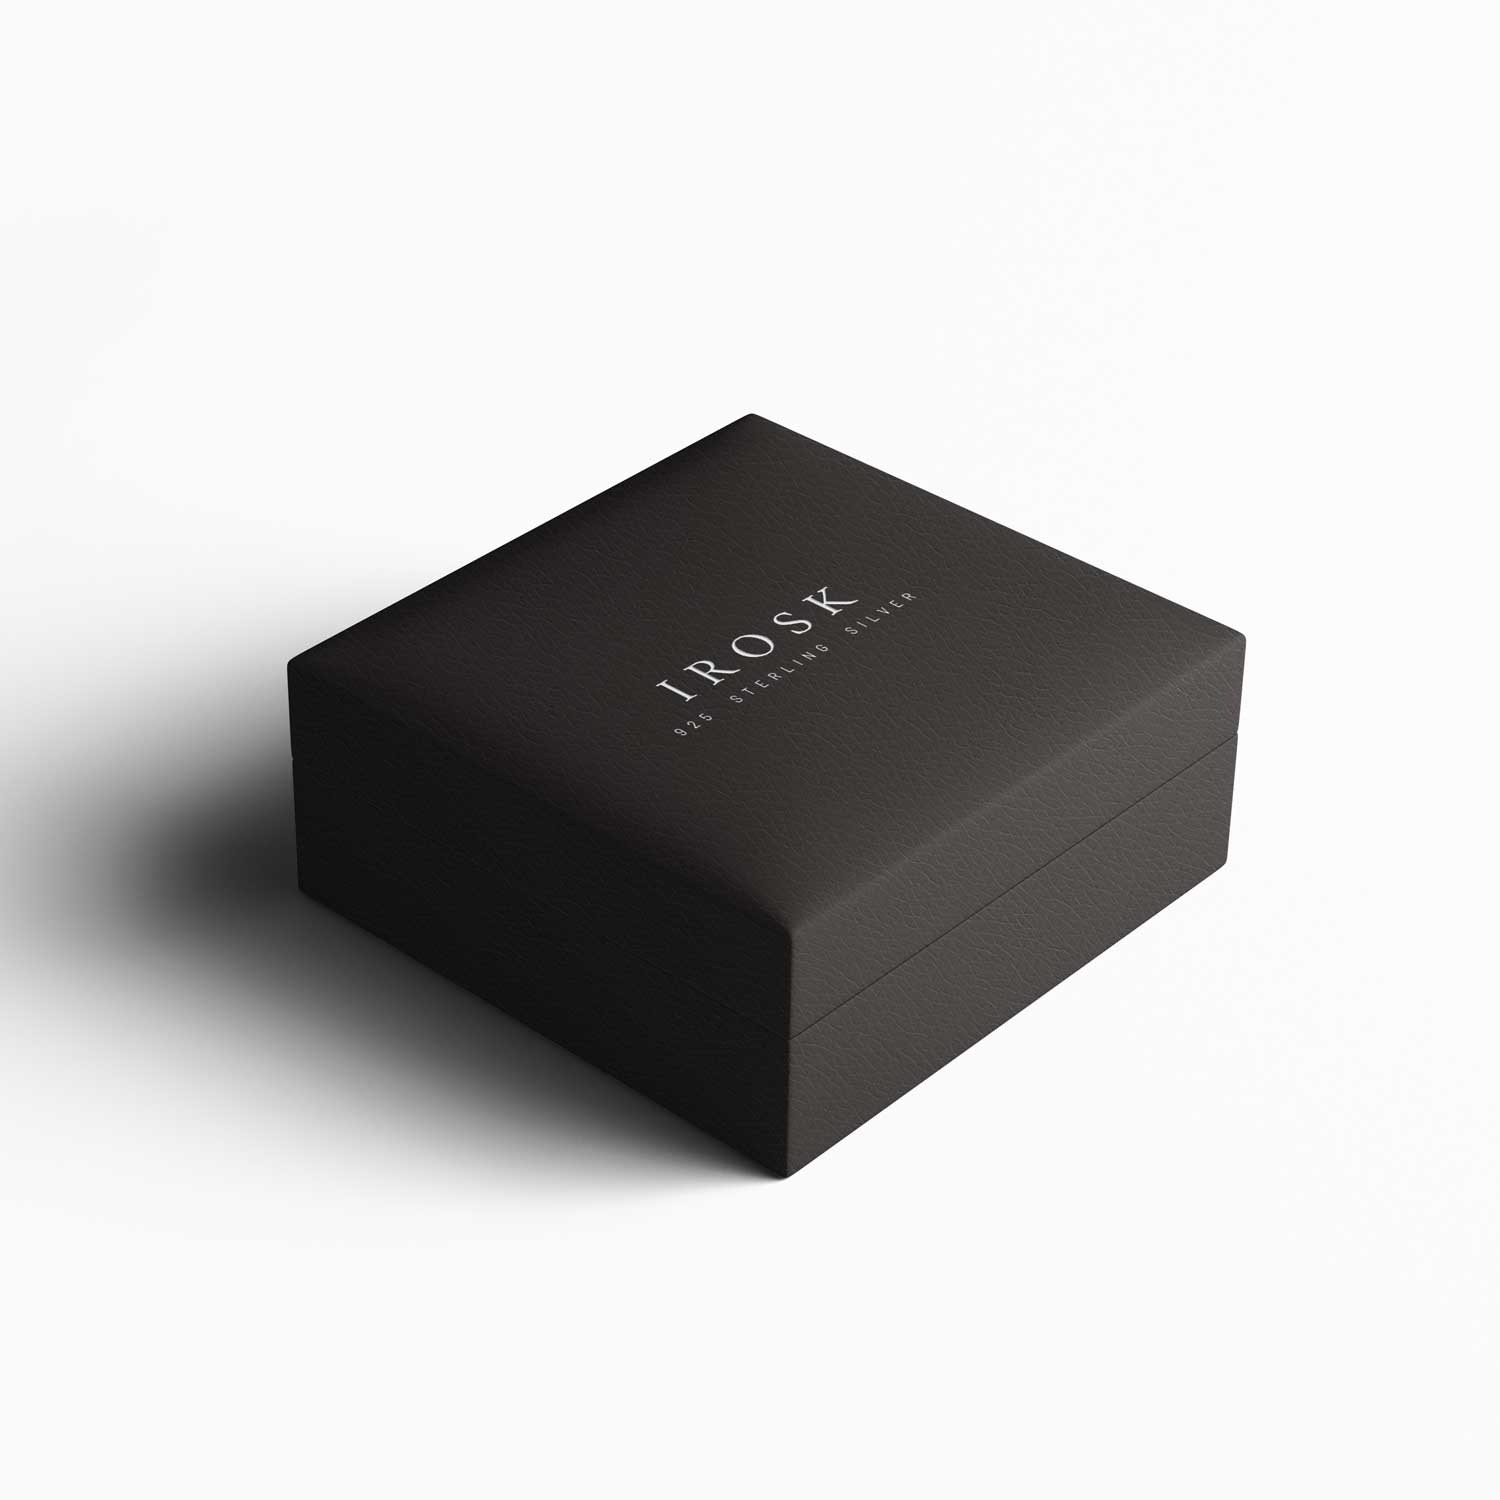 irosk luxury jewellery box which comes complimentary with the jewellery